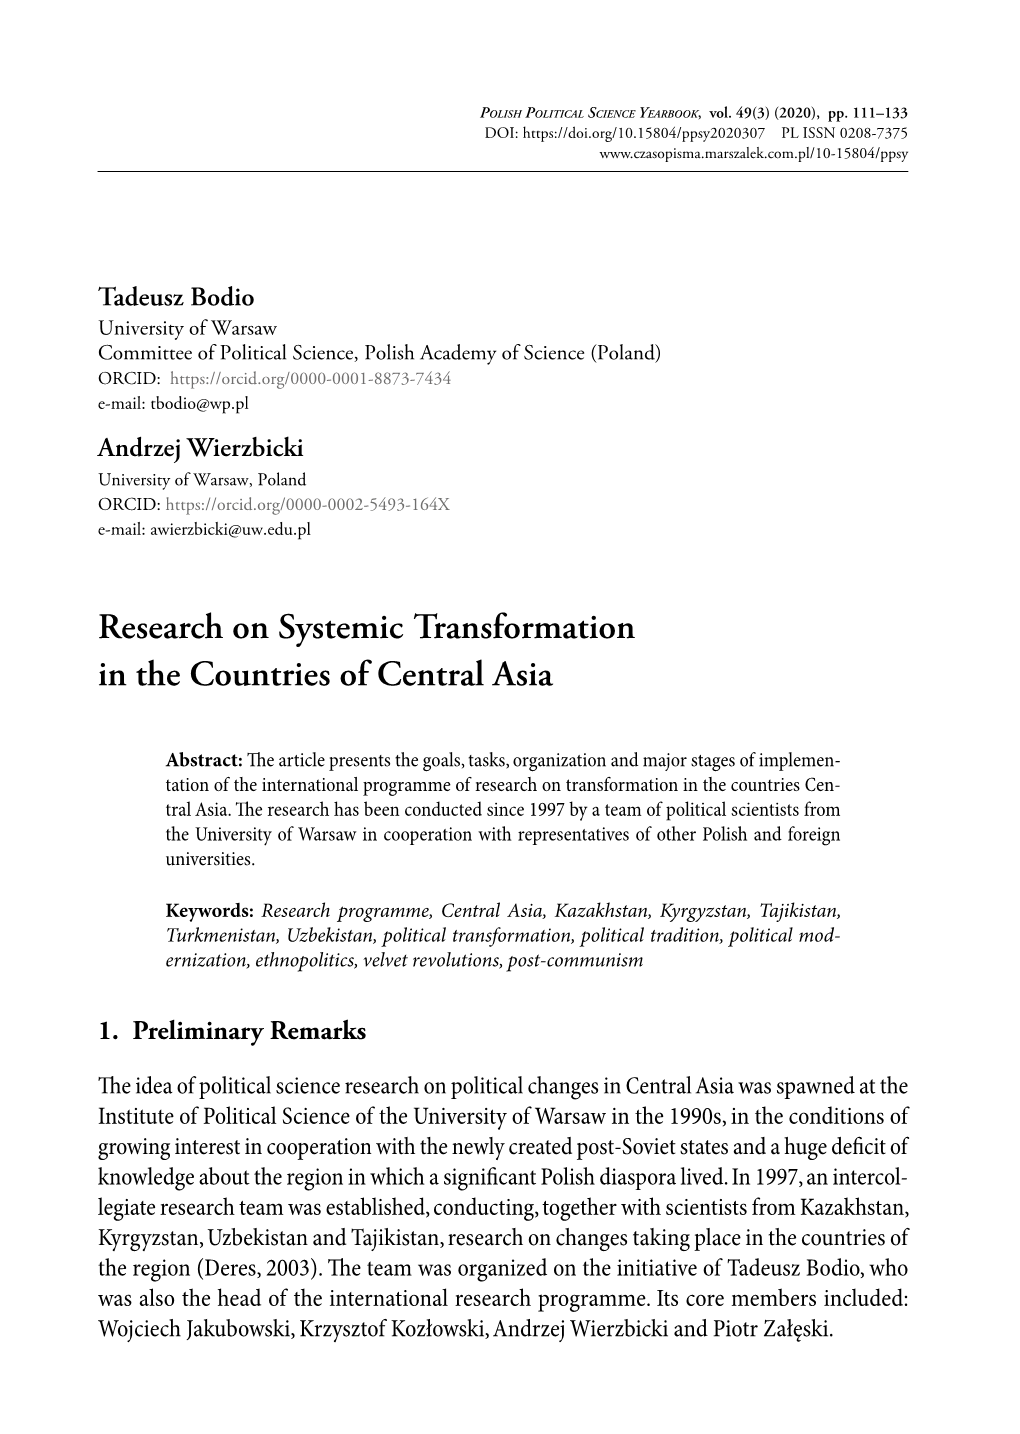 Research on Systemic Transformation in the Countries of Central Asia